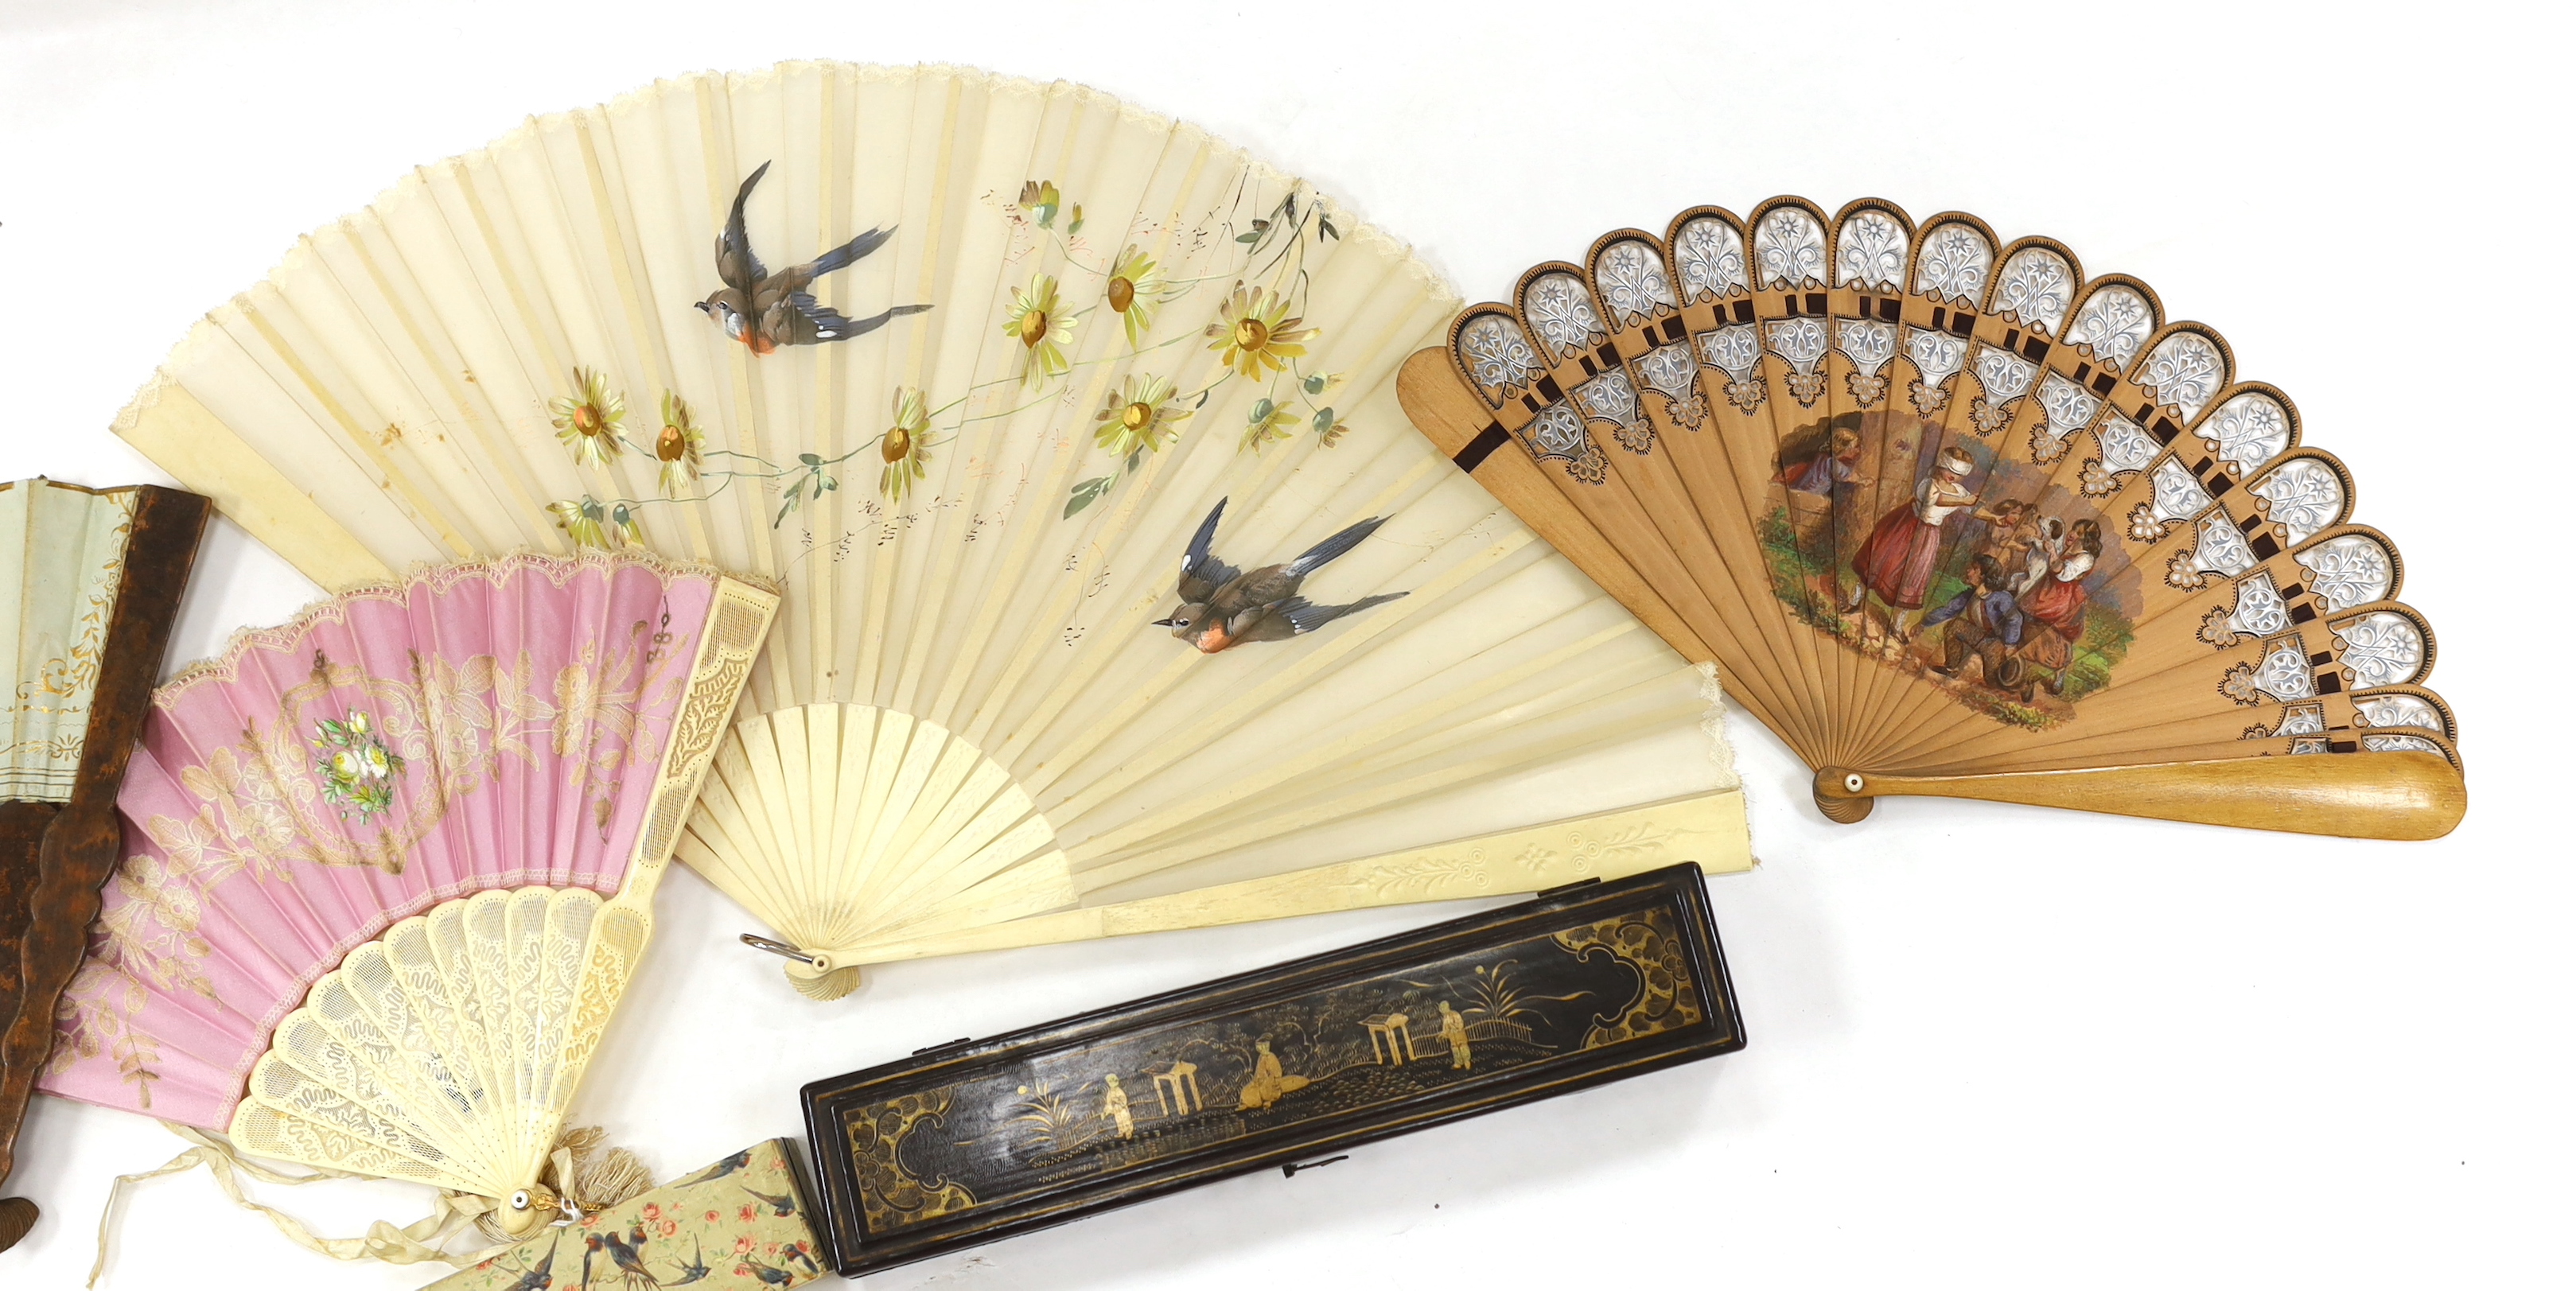 A Chinese lacquer fan box and a paper covered fan box, two Victorian fans painted with scenes of children playing, a gauze painted fan and another with bobbin lace appliqué, lacquer box 32cm wide x 4.5cm high